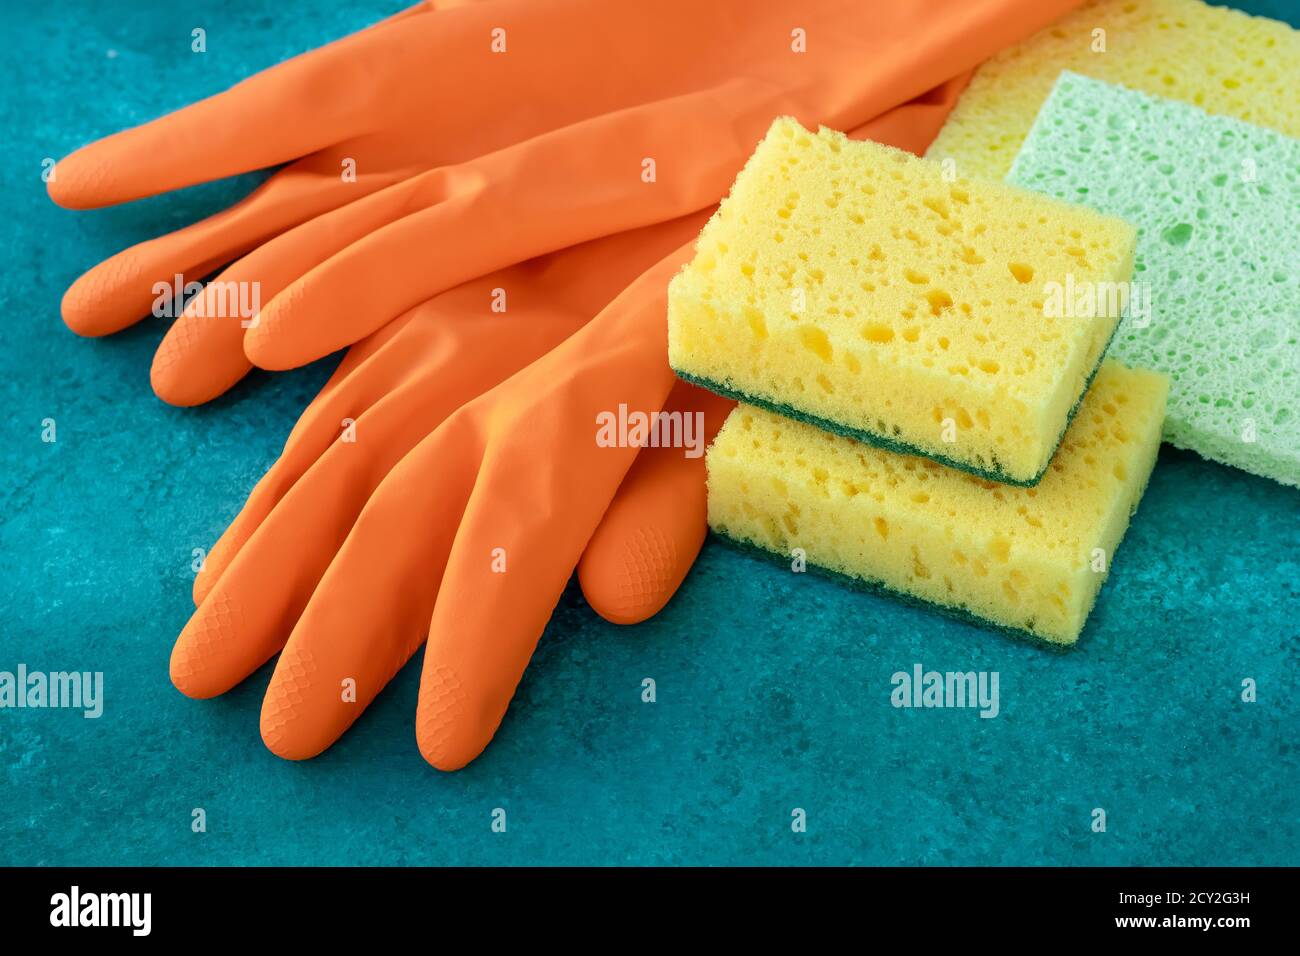 Rubber gloves with colorful kitchen sponges, housekeeping. Cleaning service concept, housework. Dish scrubber Stock Photo